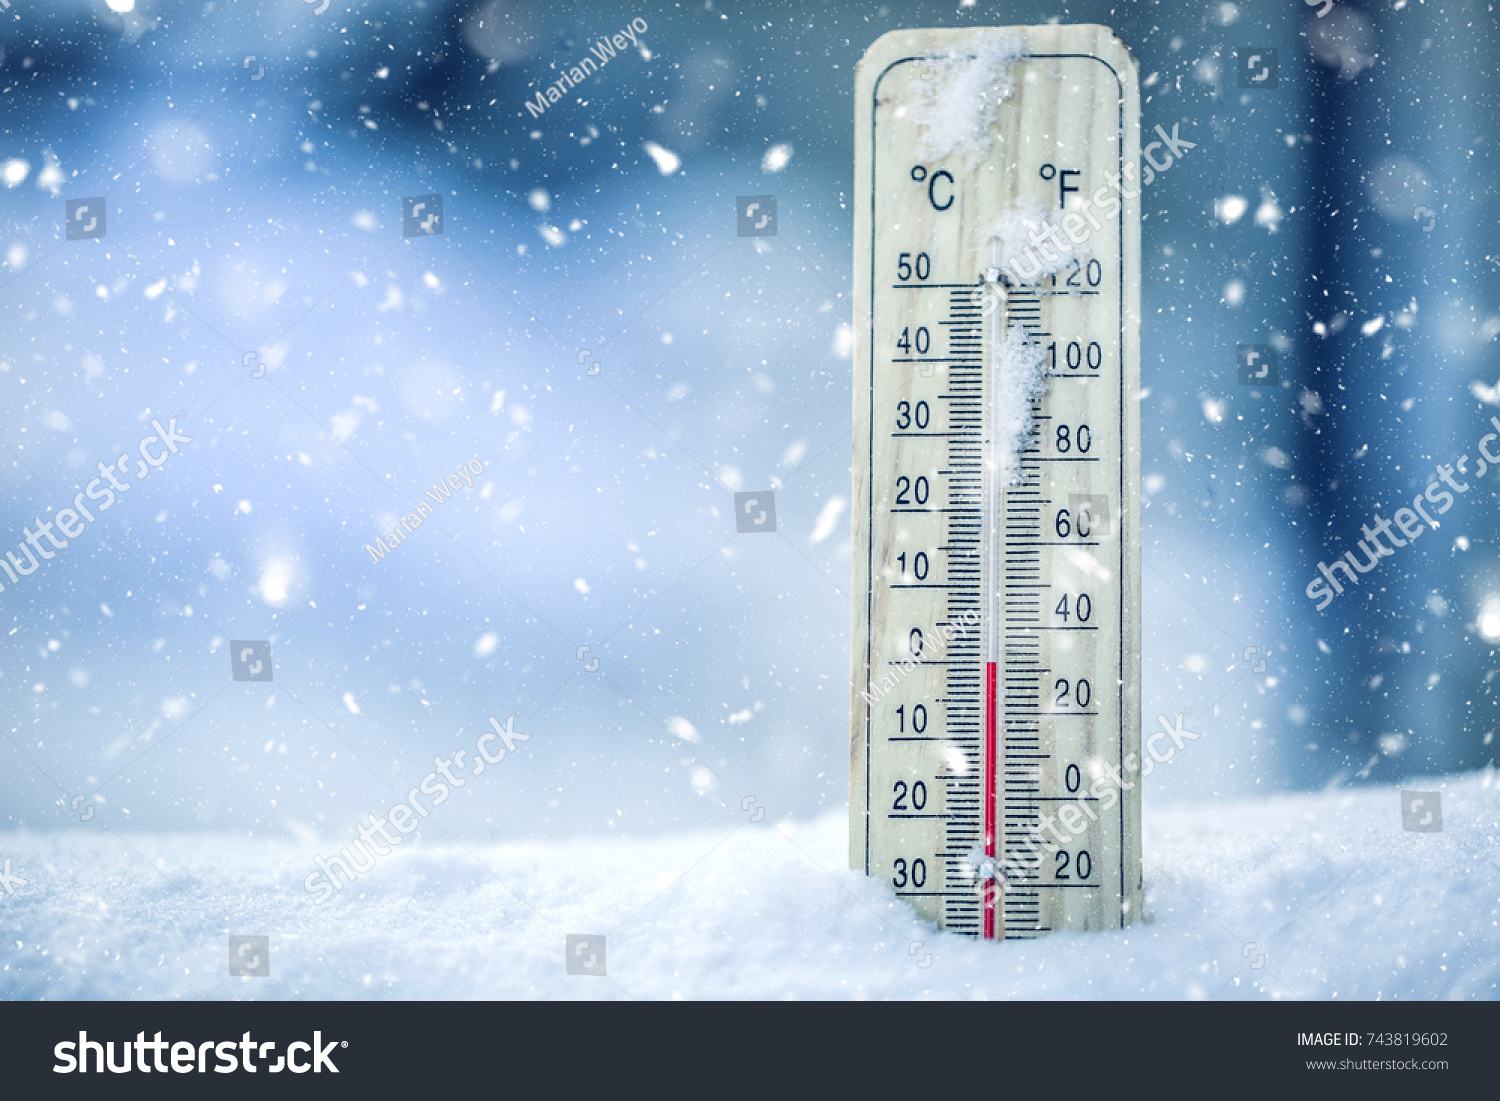 Thermometer on snow shows low temperatures in celsius or farenheit. #743819602